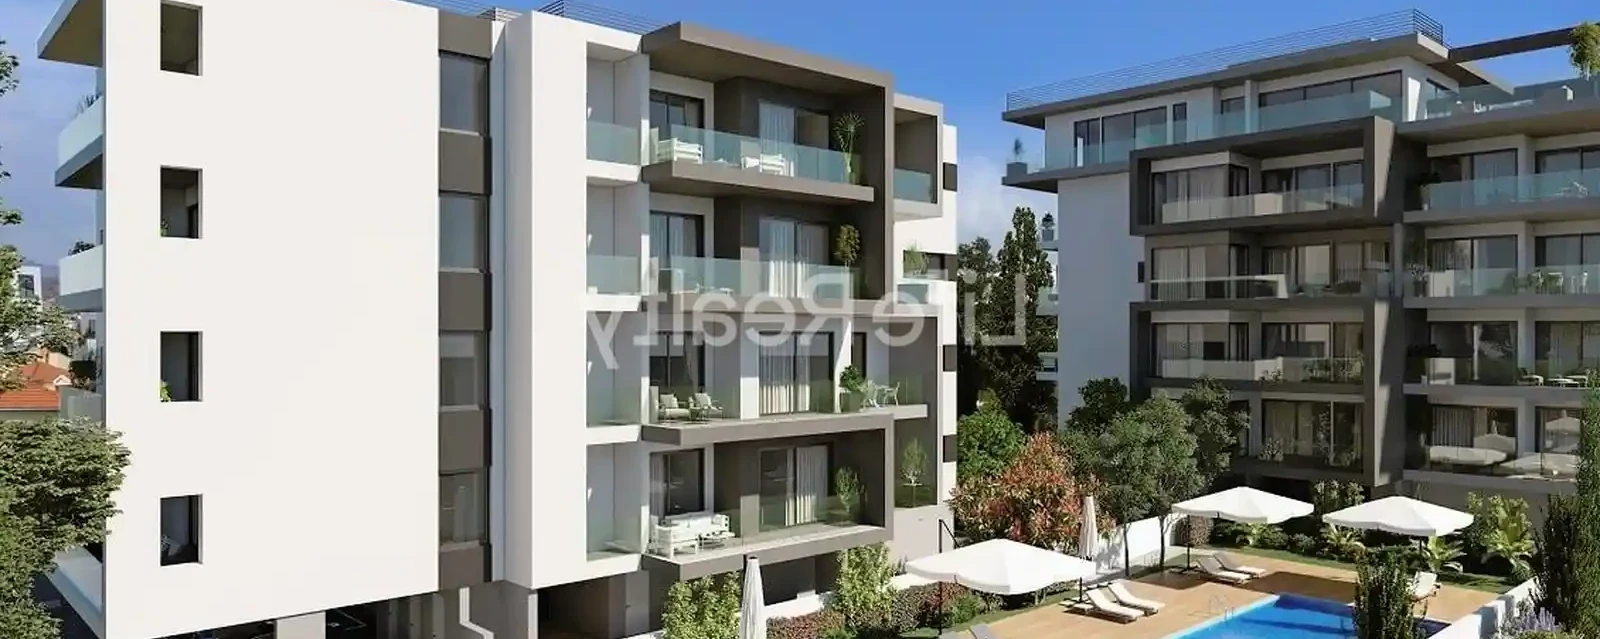 1-bedroom apartment fоr sаle €275.000, image 1